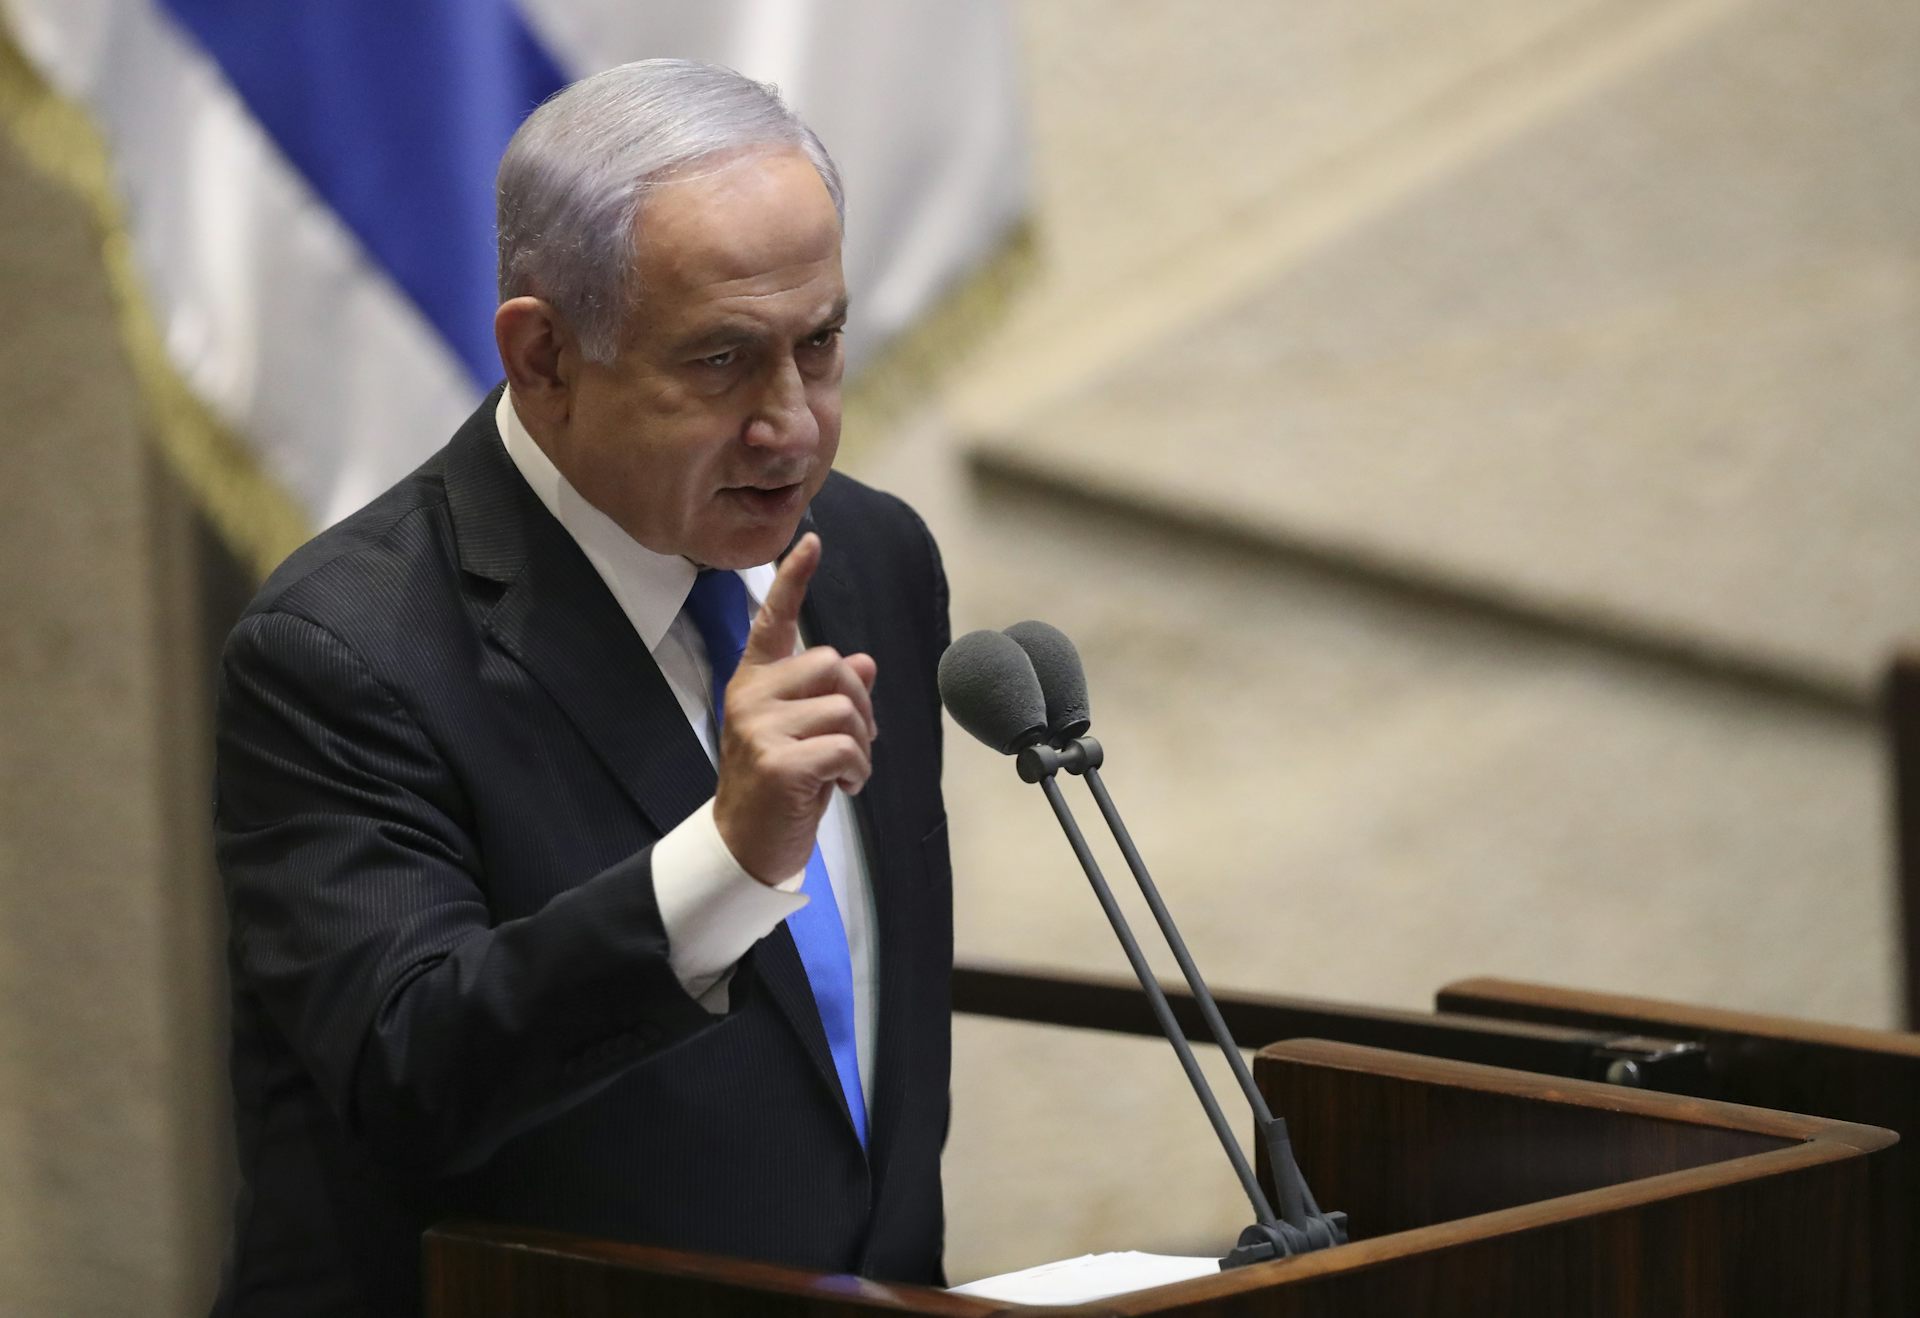 Netanyahu May Be Ousted but His Hard-Line Foreign Policies Remain